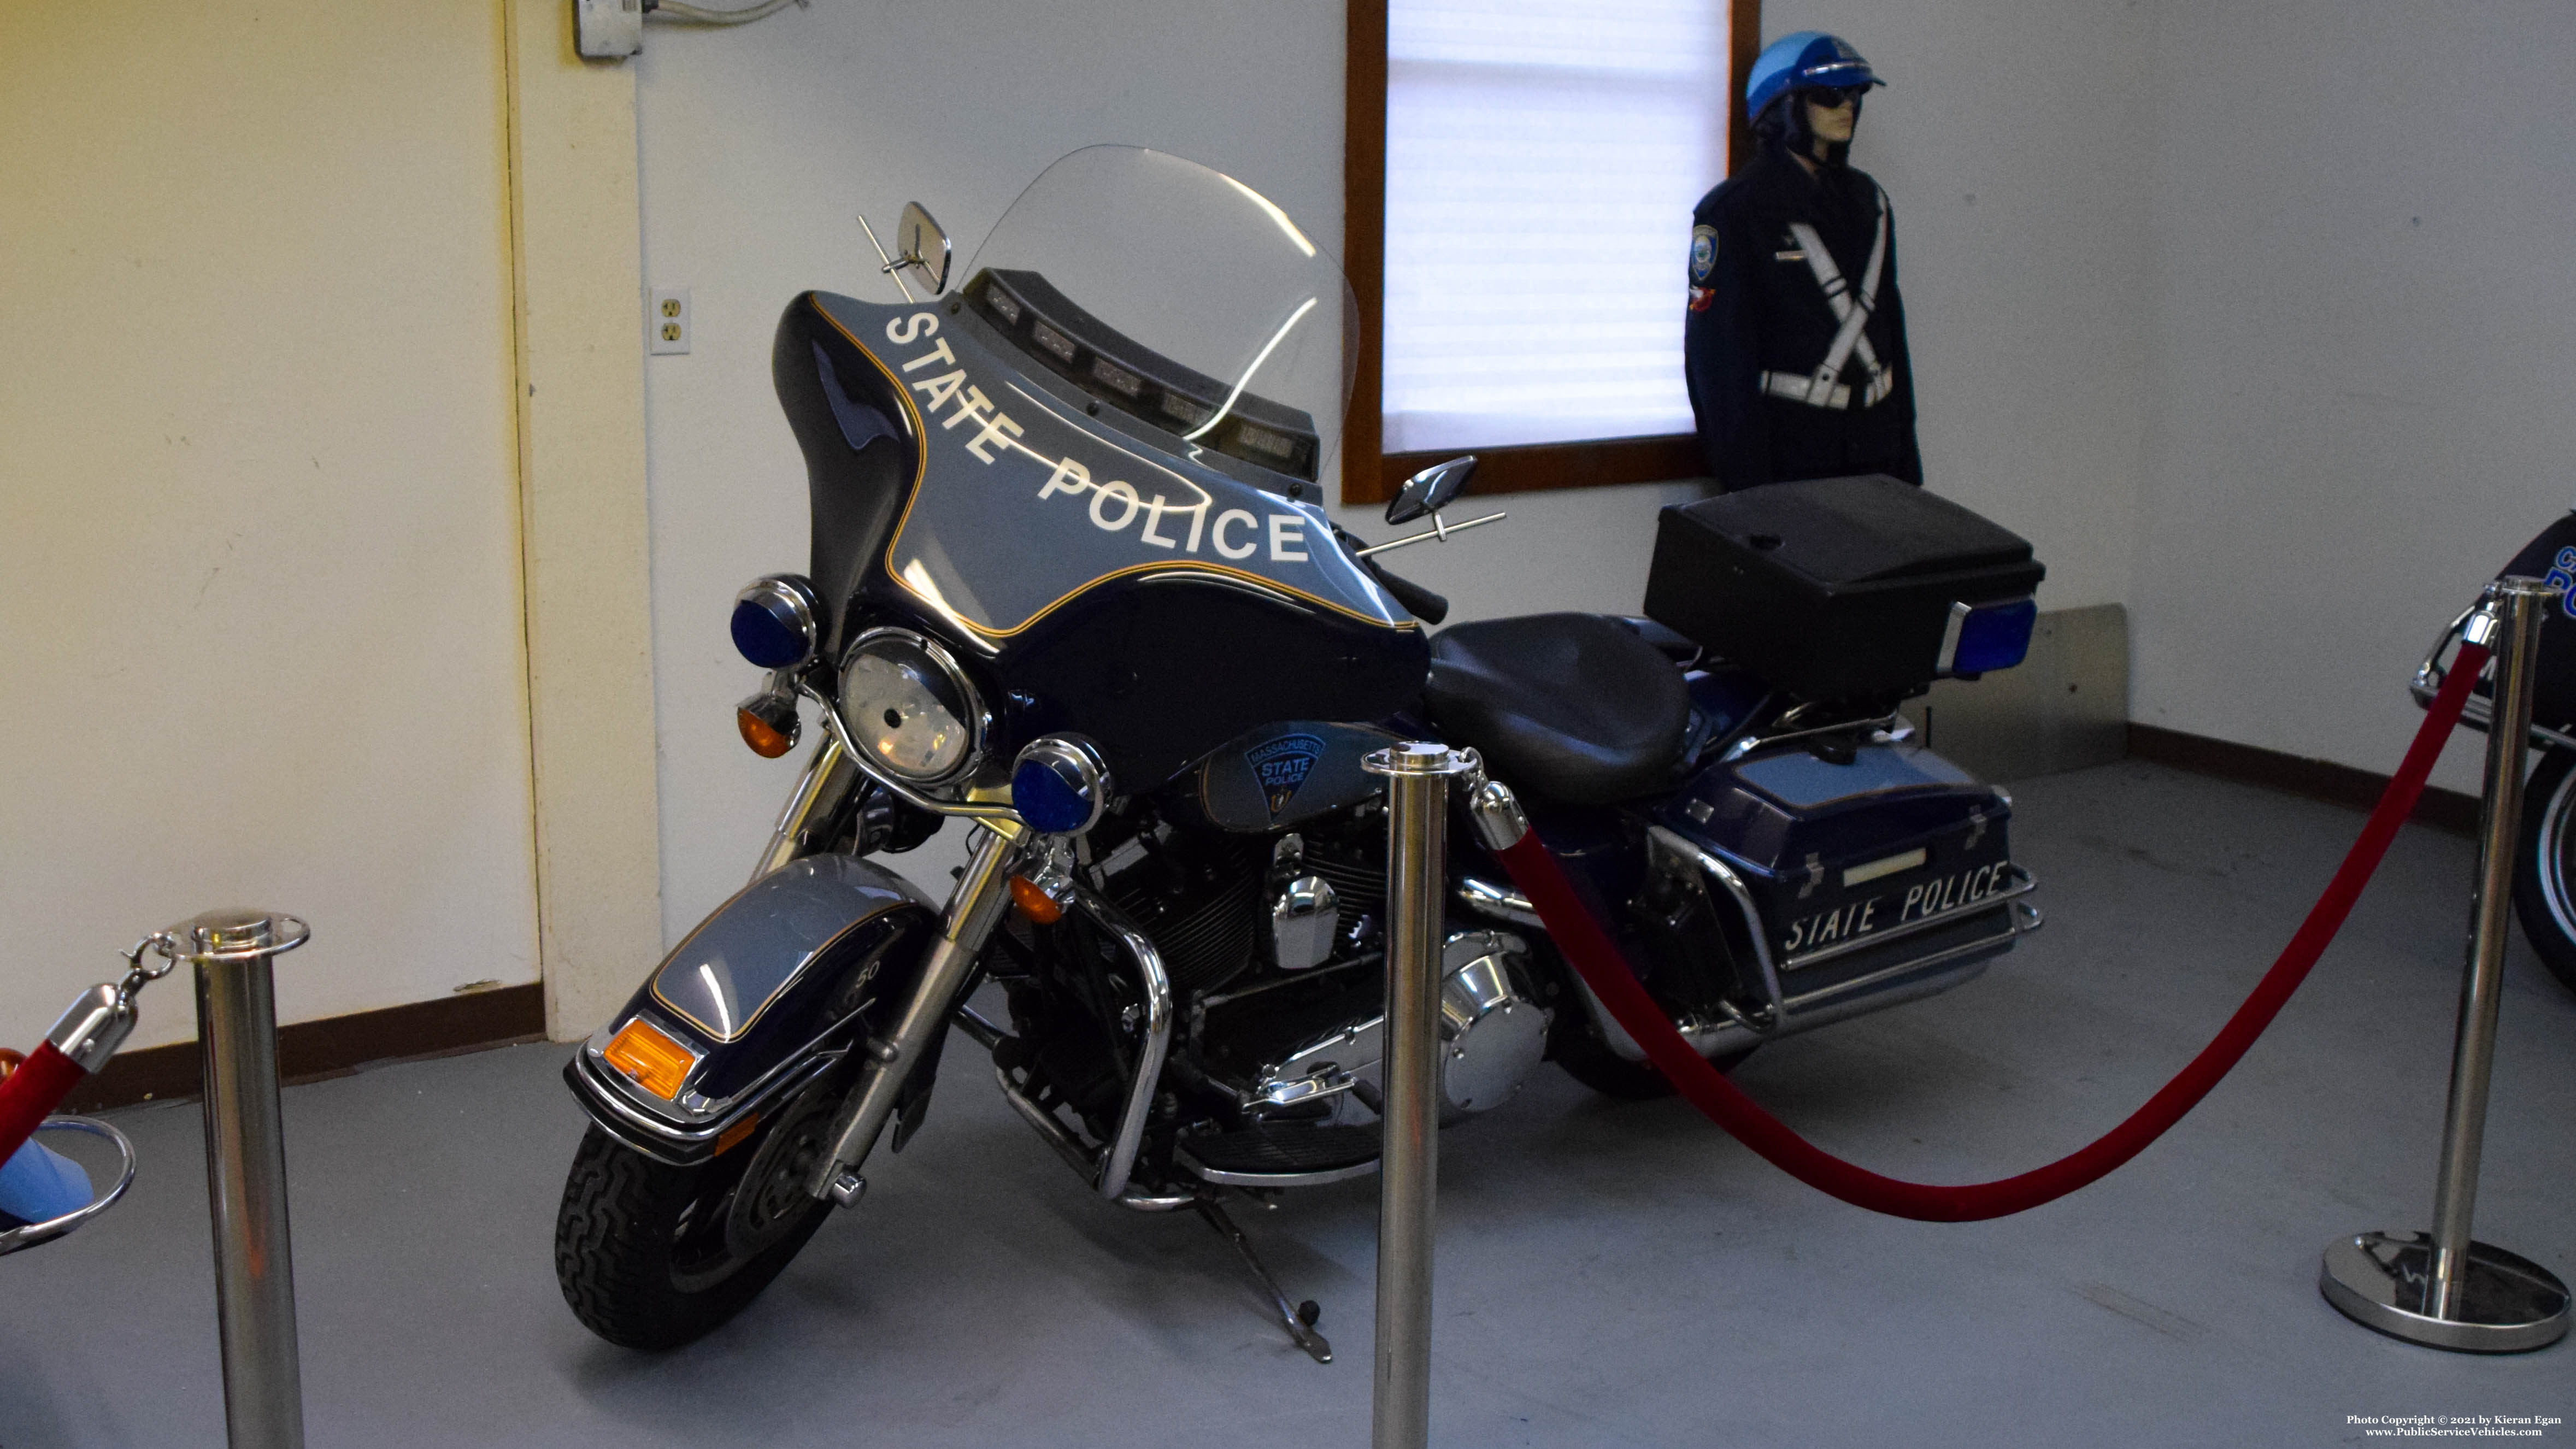 A photo  of Massachusetts State Police Museum and Learning Center
            Motorcycle 50, a 2009 Harley Davidson Electra Glide             taken by Kieran Egan